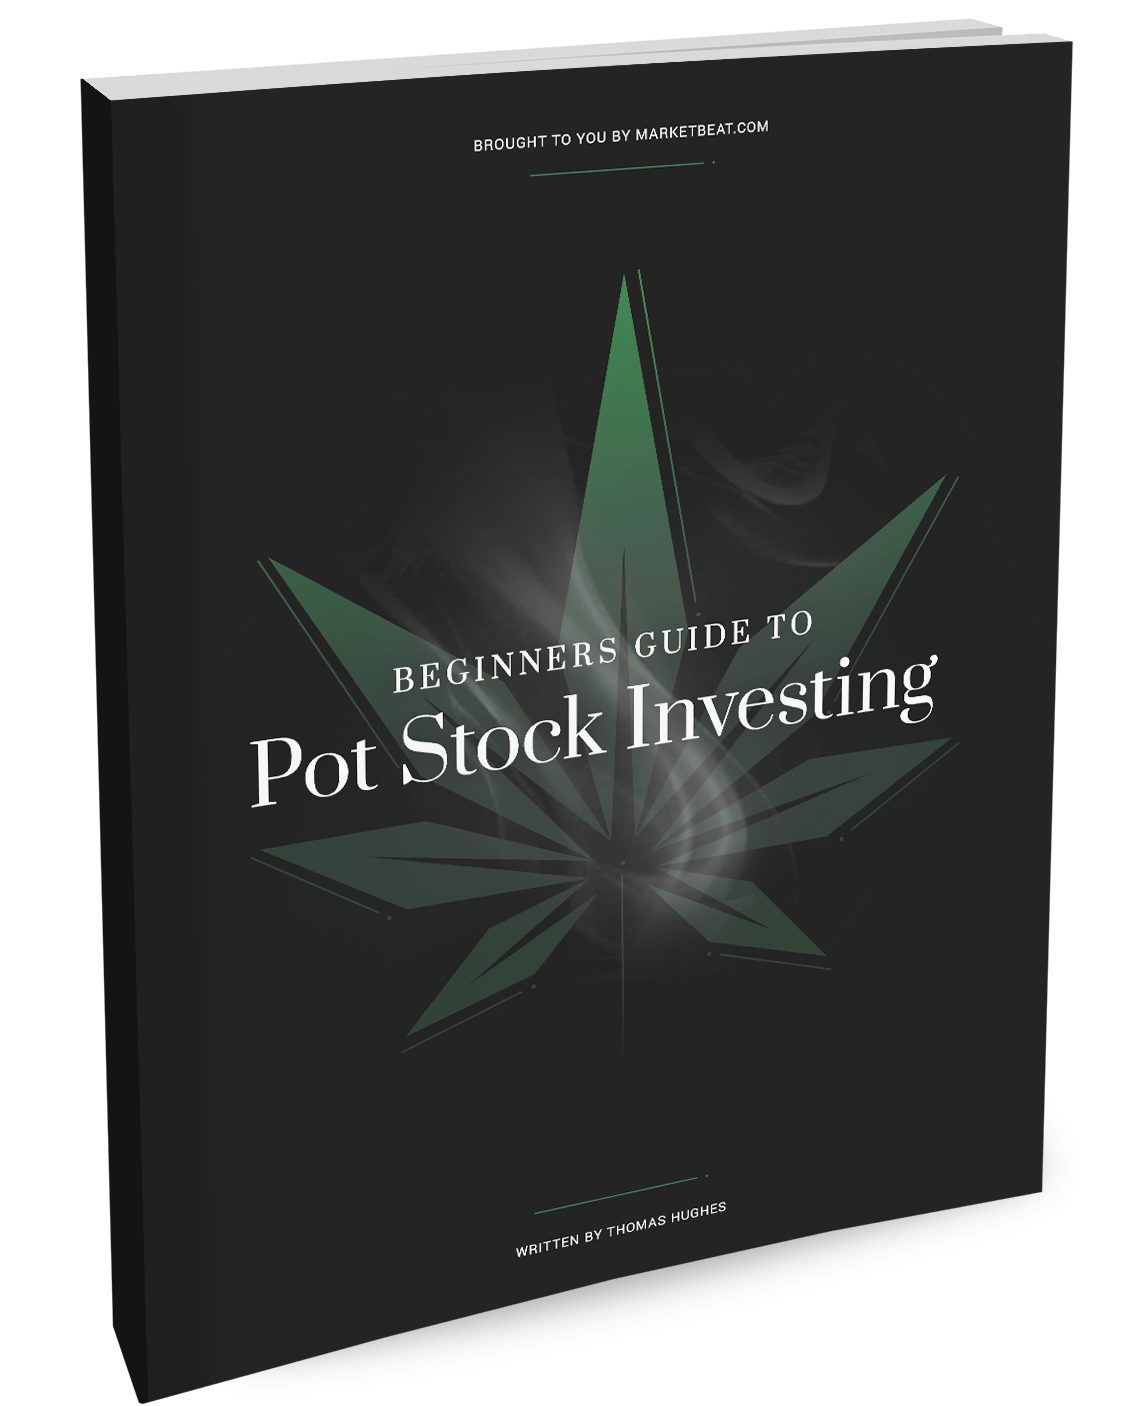 The Beginner's Guide To Pot Stock Investing Covers